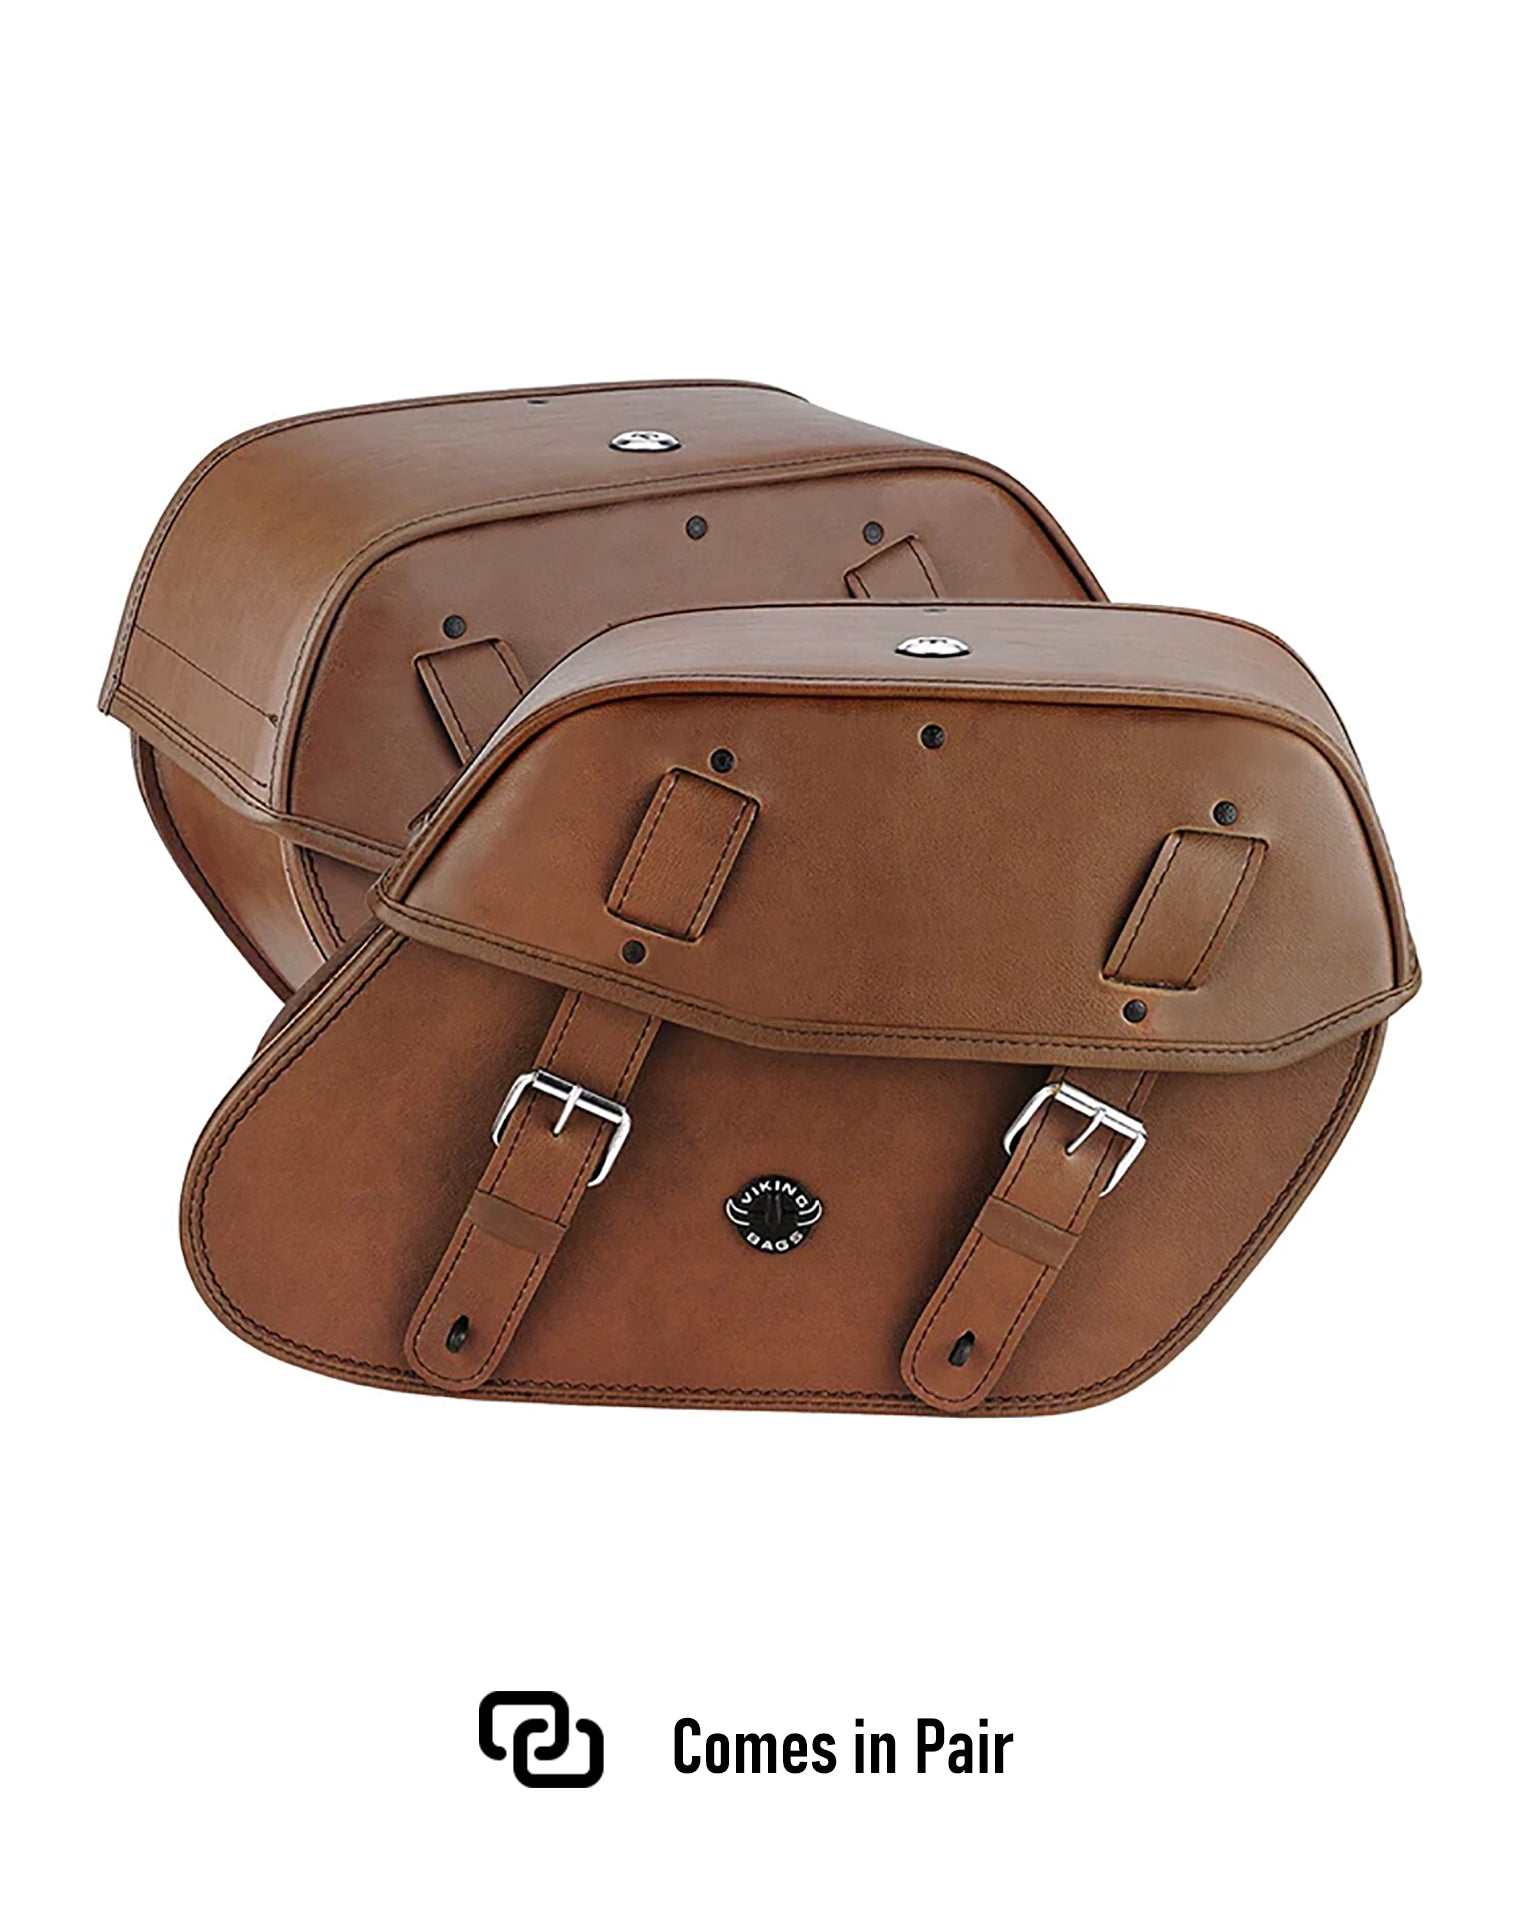 Viking Odin Brown Large Victory V92C Leather Motorcycle Saddlebags Weather Resistant Bags Comes in Pair